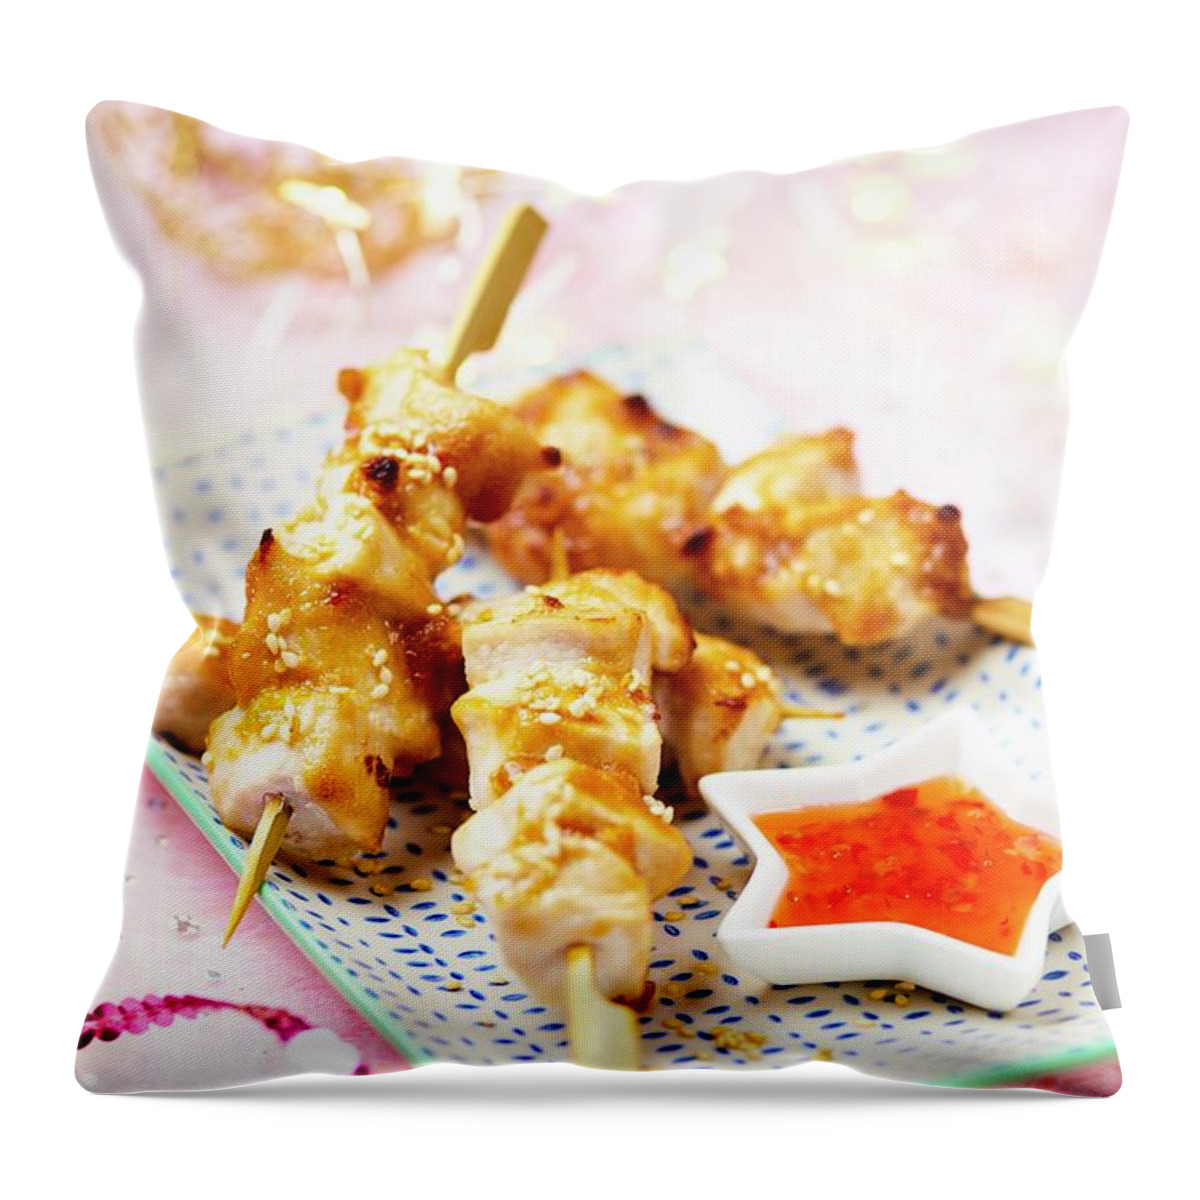 Ip_12339432 Throw Pillow featuring the photograph Chicken Satay Skewers With Chilli Sauce christmas by Jonathan Short